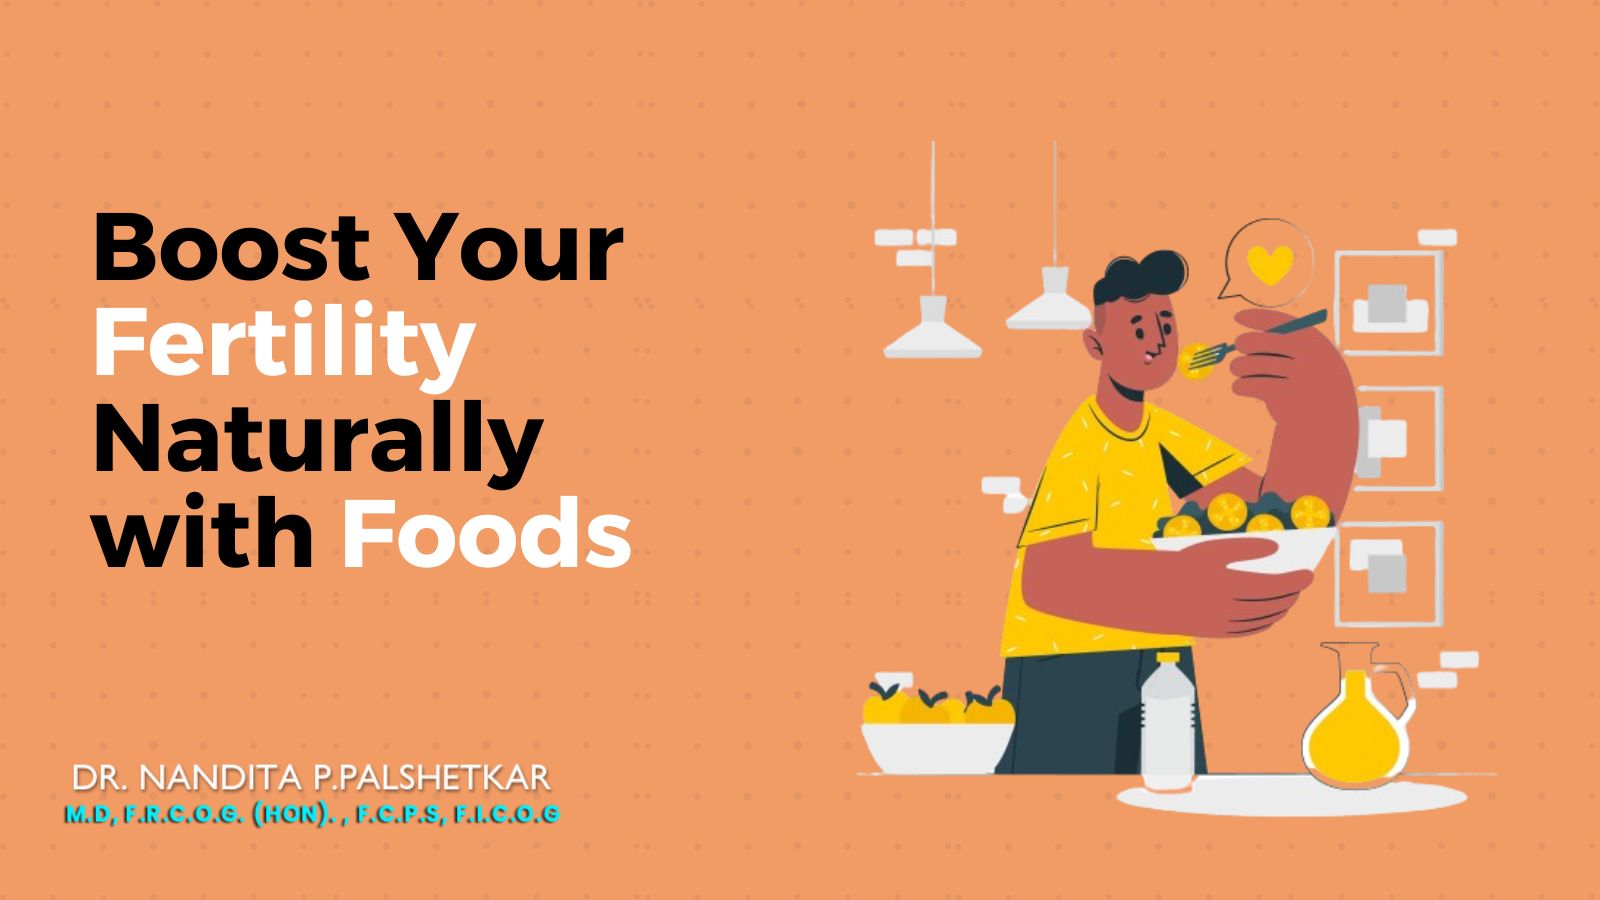 Boost Your Fertility Naturally: 7 Must-Have Foods and 4 Bonus Picks